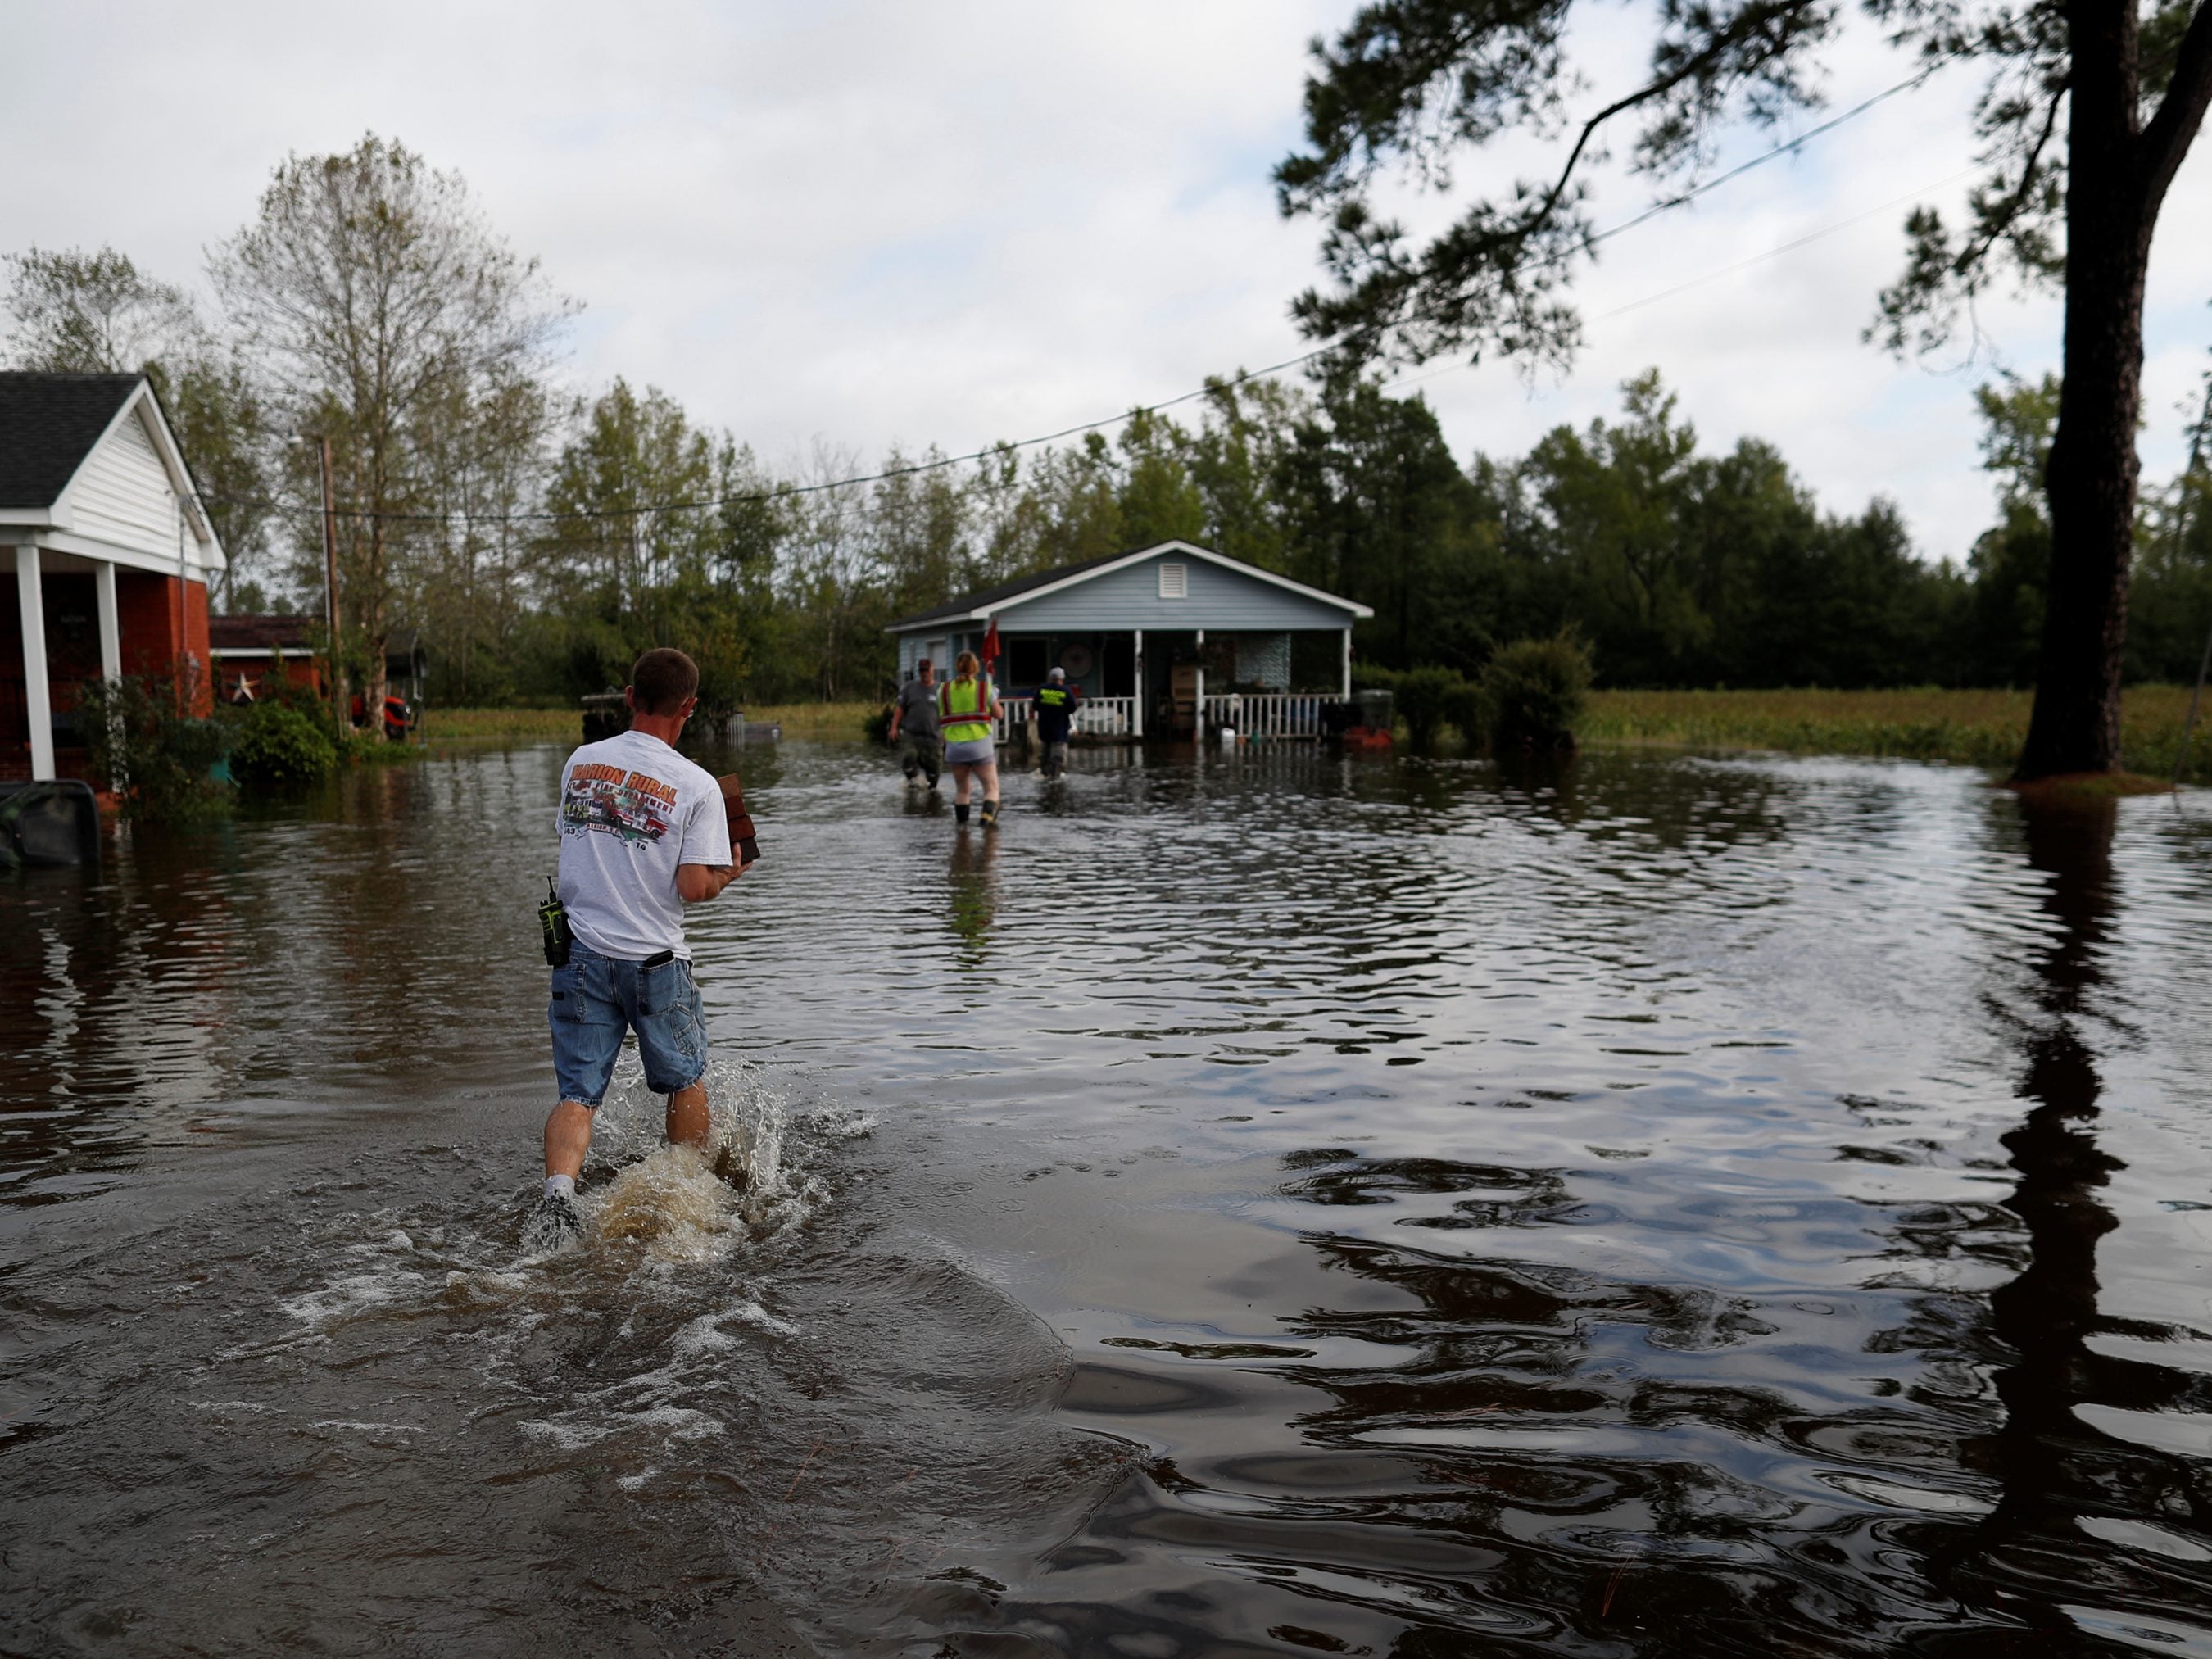 Members of the Marion Rural Fire Department hand-deliver supplies to a homeowner flooded by rains from Florence in Marion, S.C., on Monday.